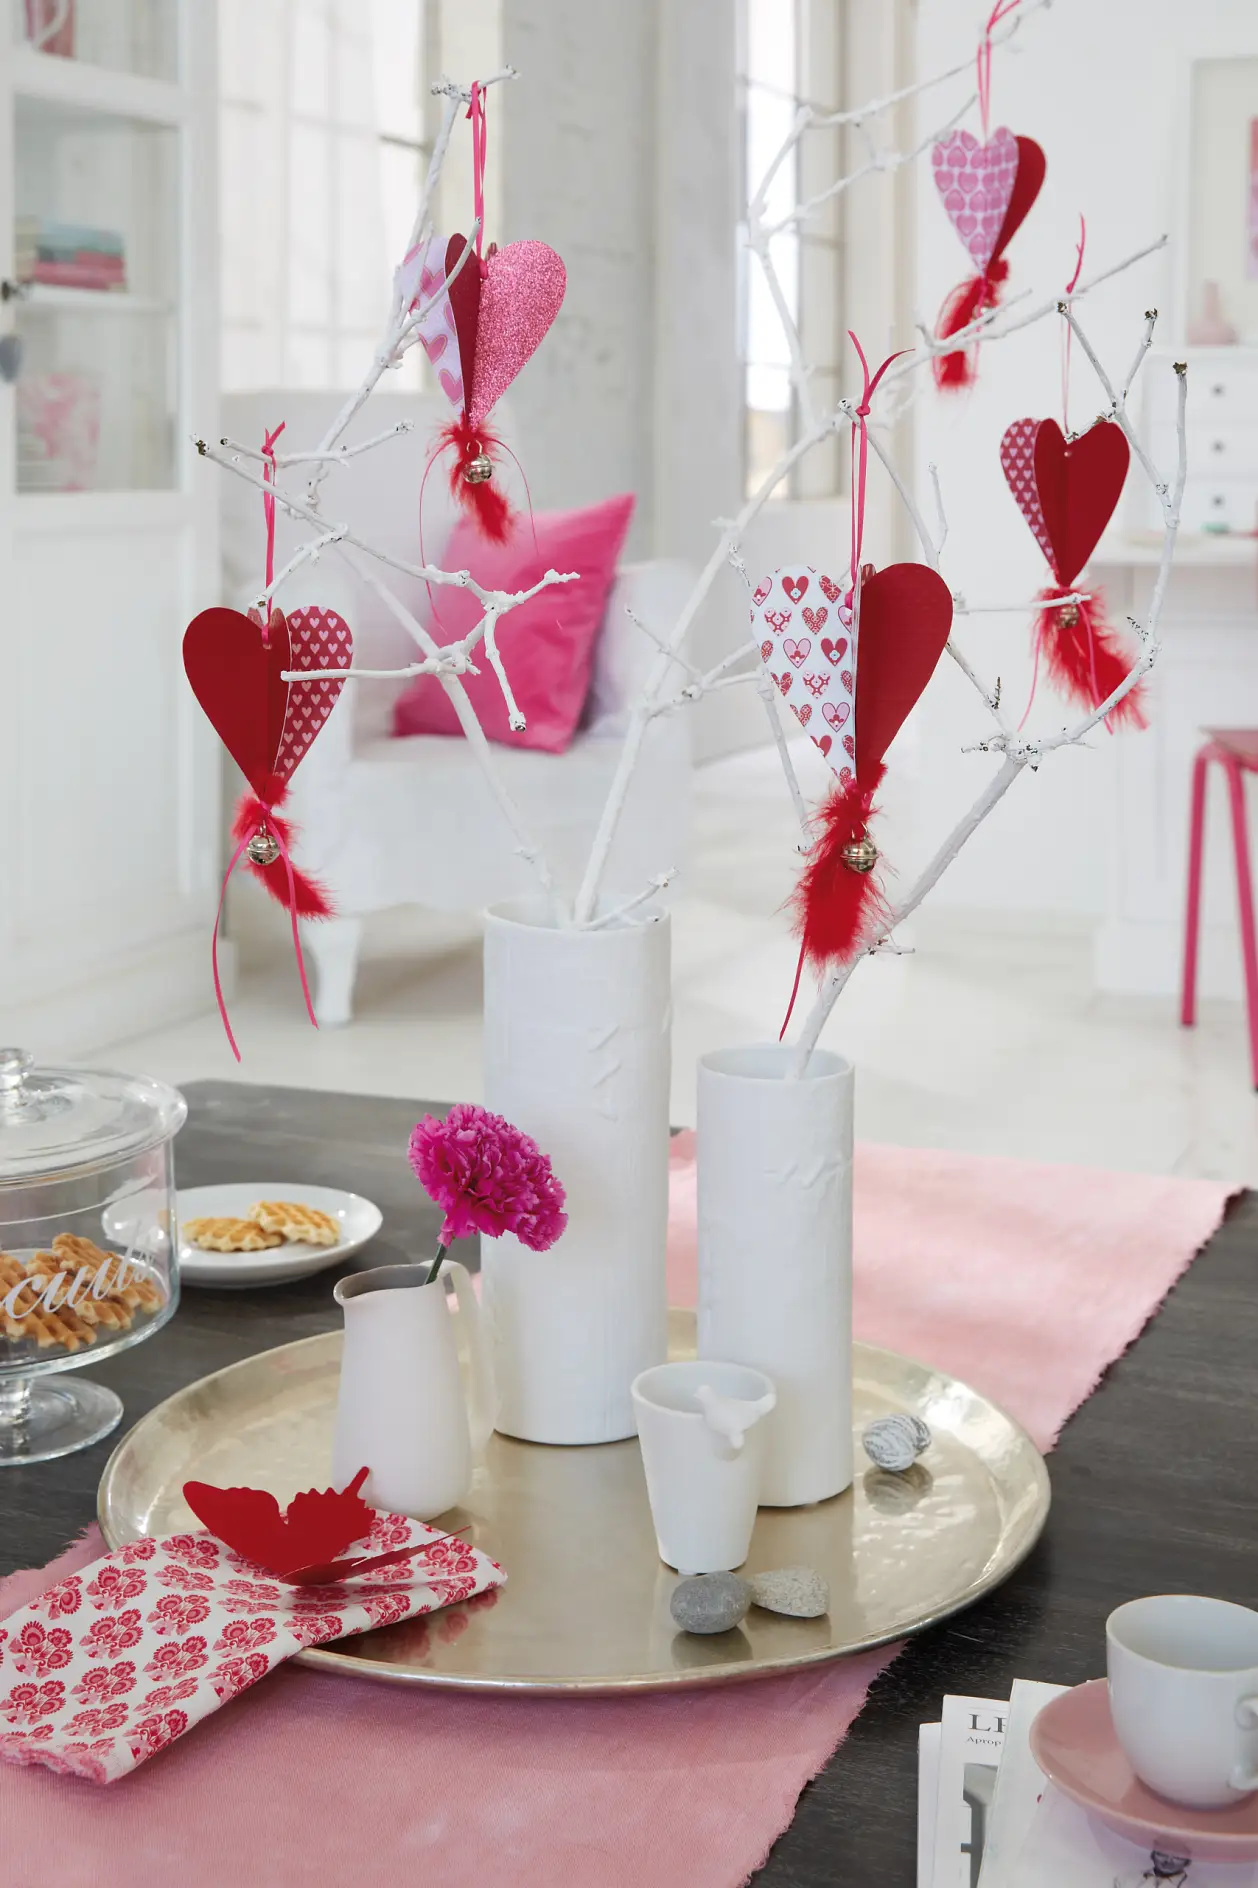 Homemade paper hearts hang in the bouquet made of branches painted white for Valentine's Day.